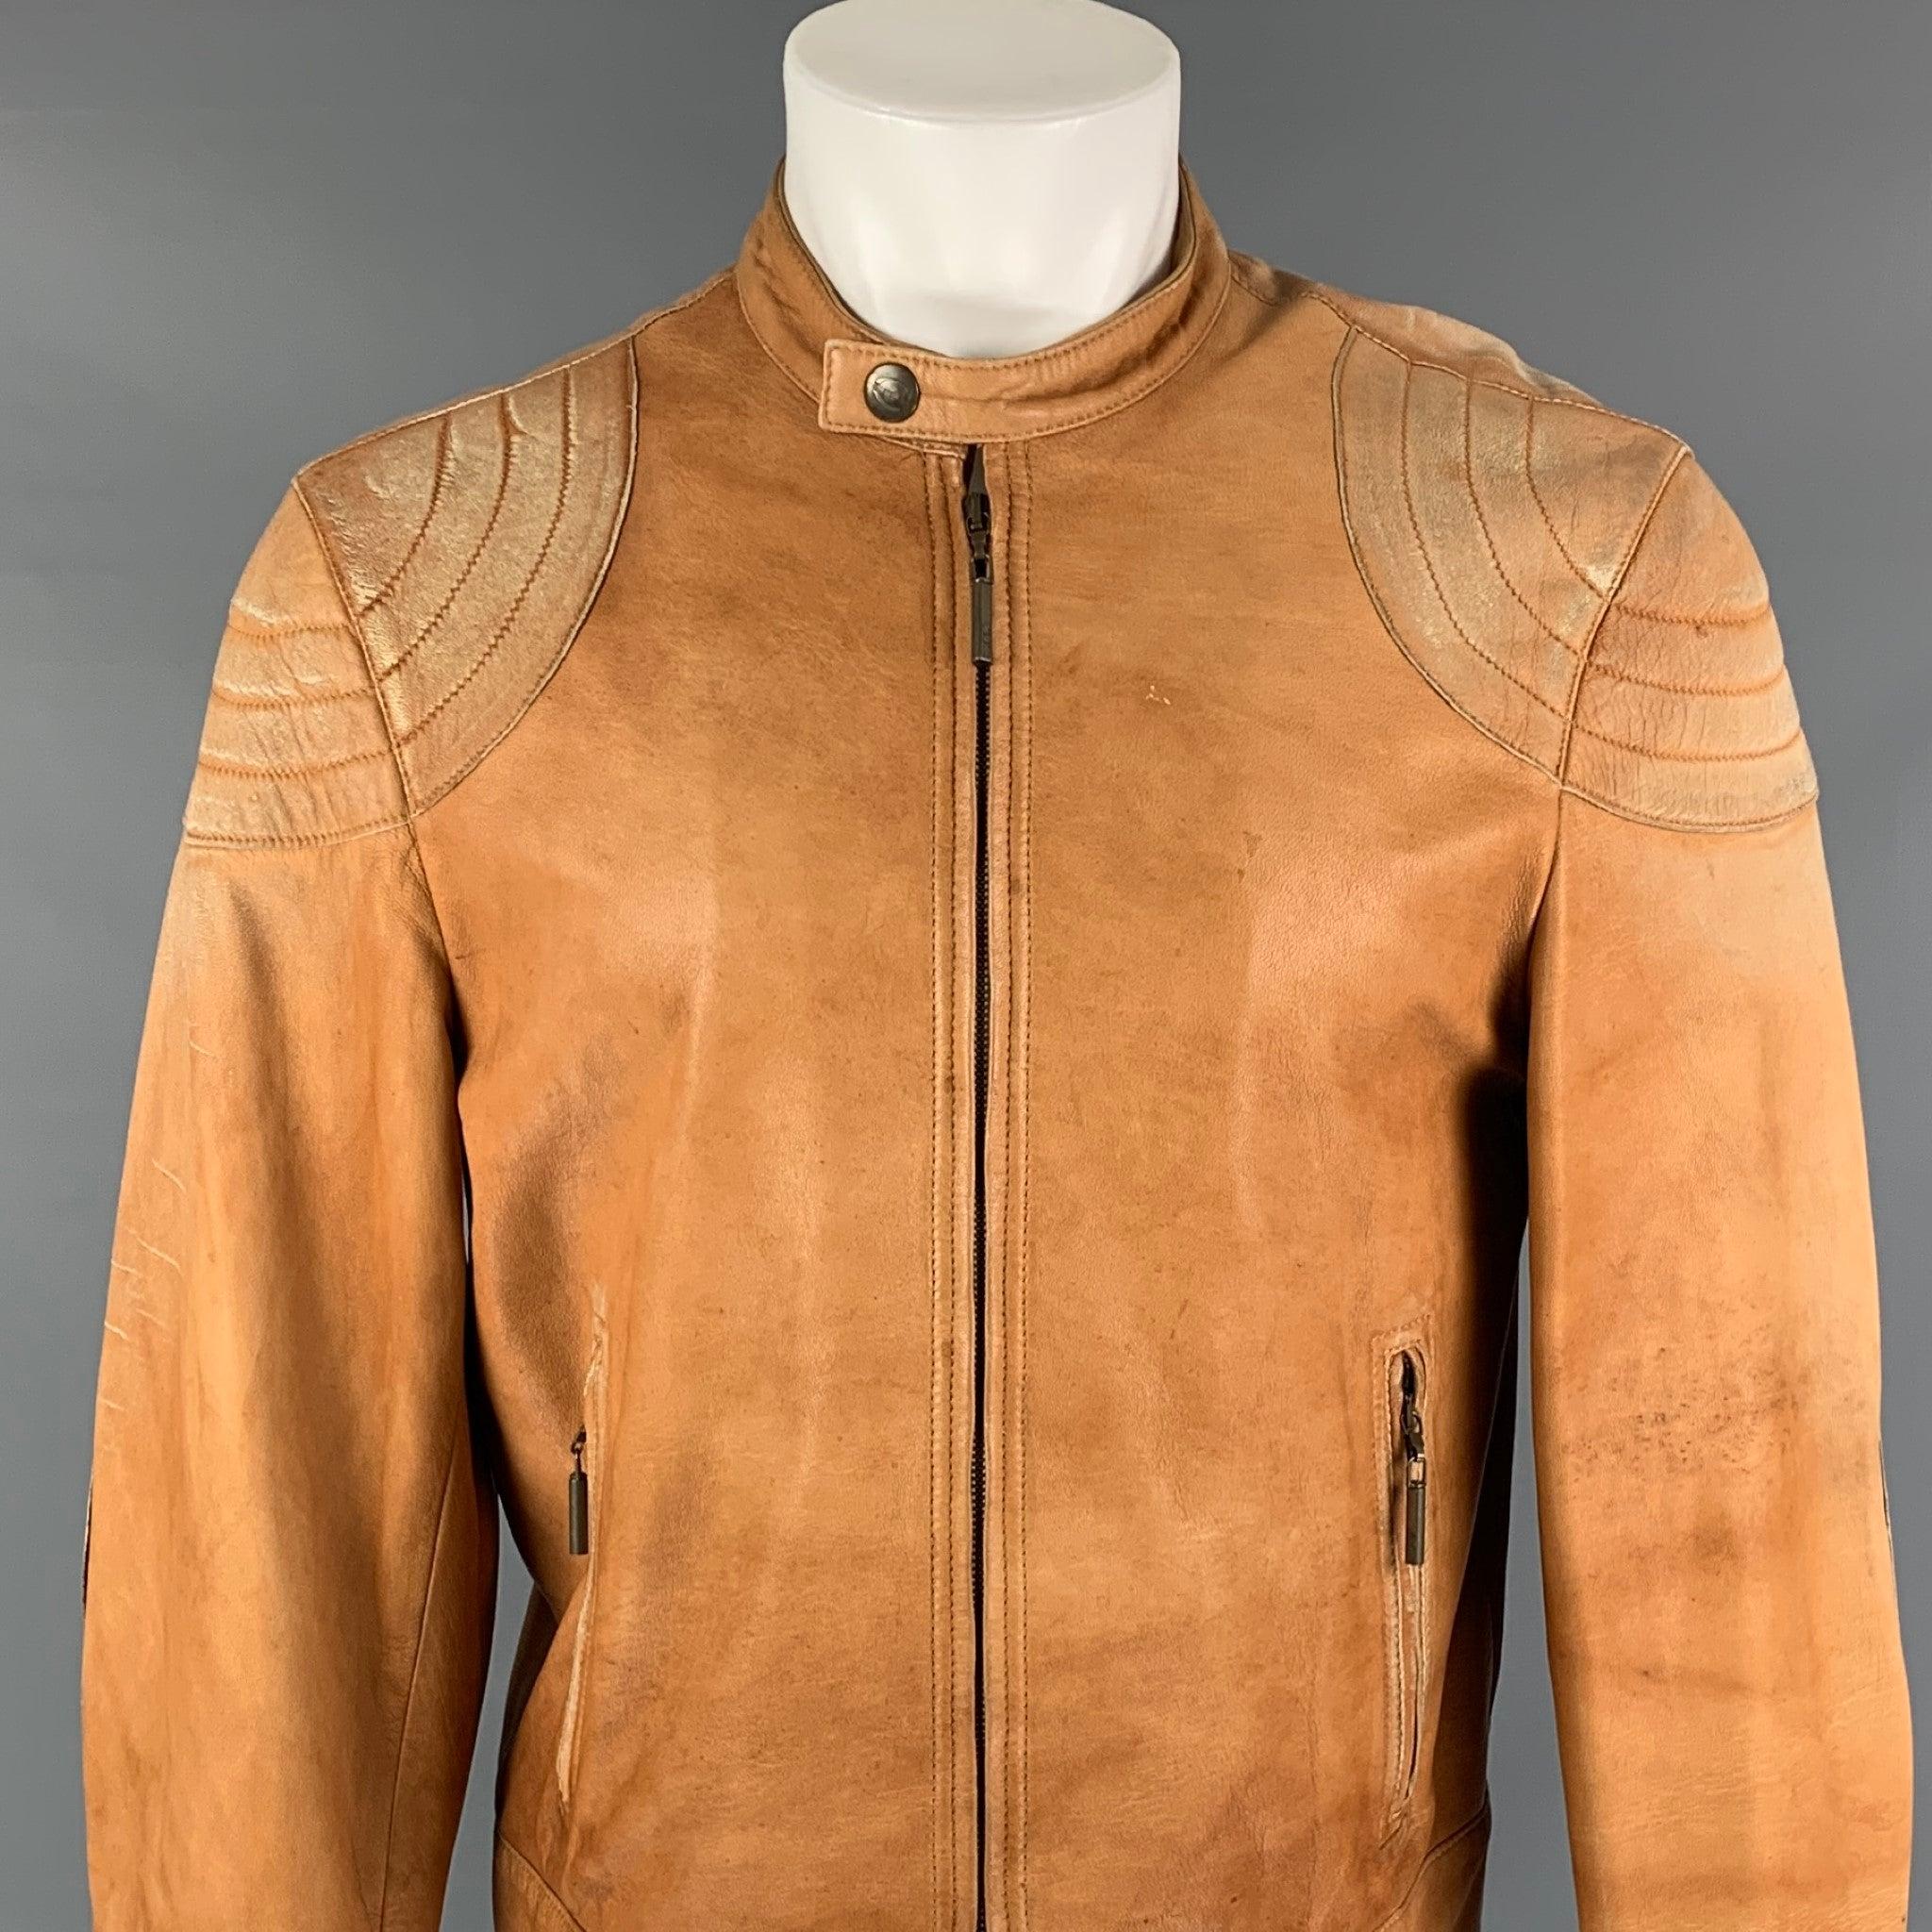 JUST CAVALLI jacket comes in a tan distressed leather featuring a biker style, elbow patches, zipper pocket,collar strap detail, and a full zip up closure.Good
Pre-Owned Condition.  

Marked:   50 

Measurements: 
 
Shoulder: 18.5 inches  Chest: 40